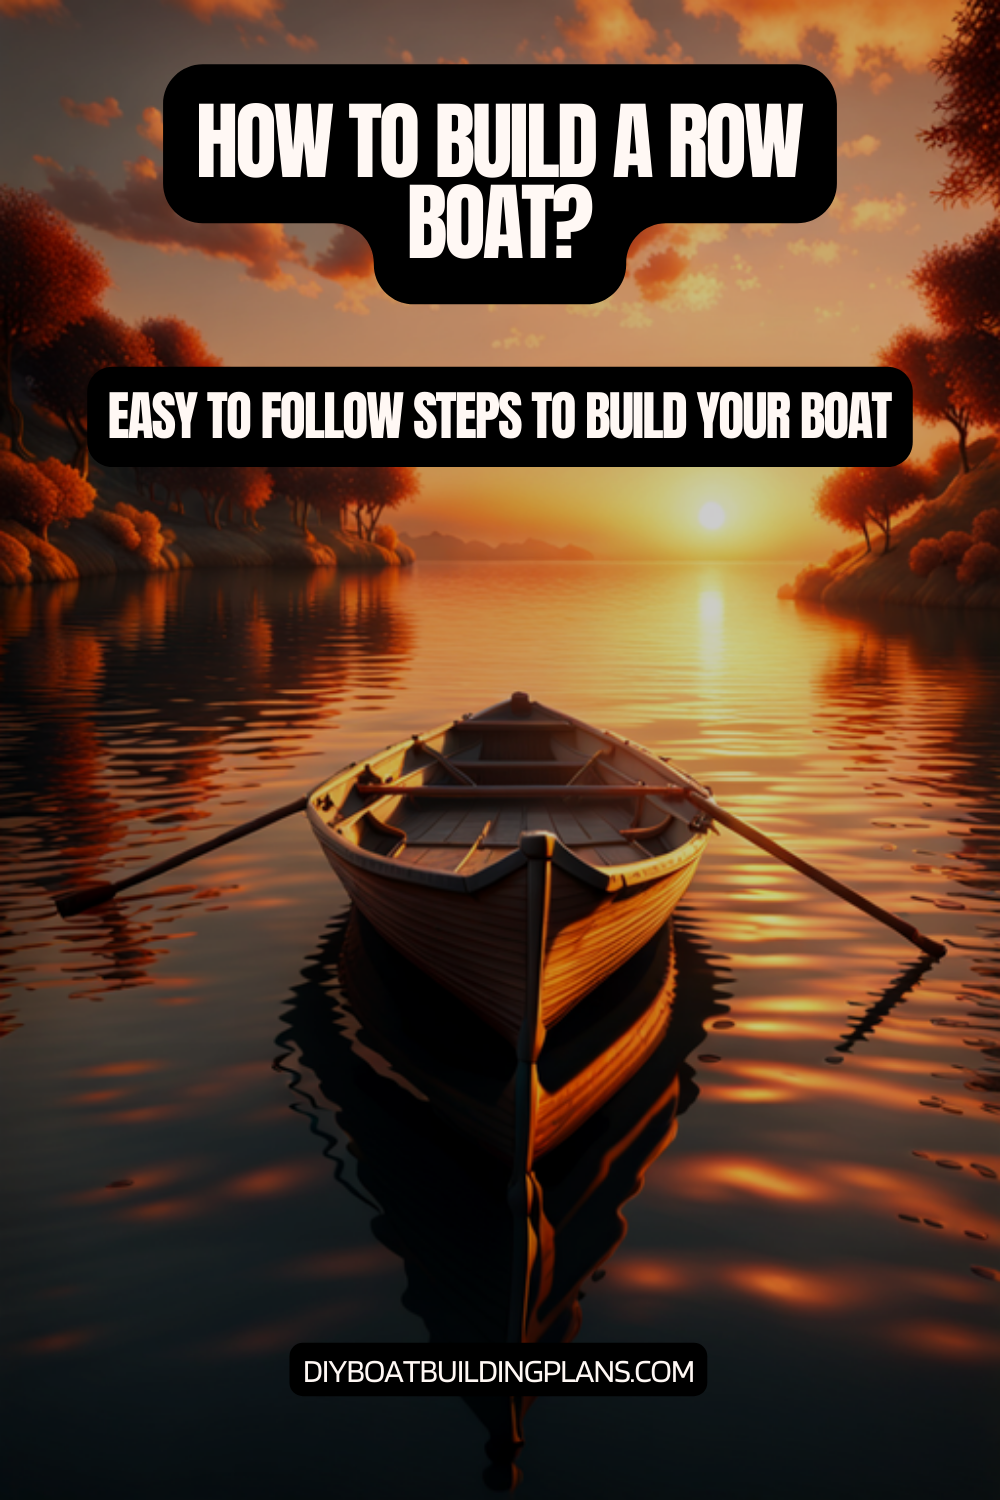 How To Build a Row Boat